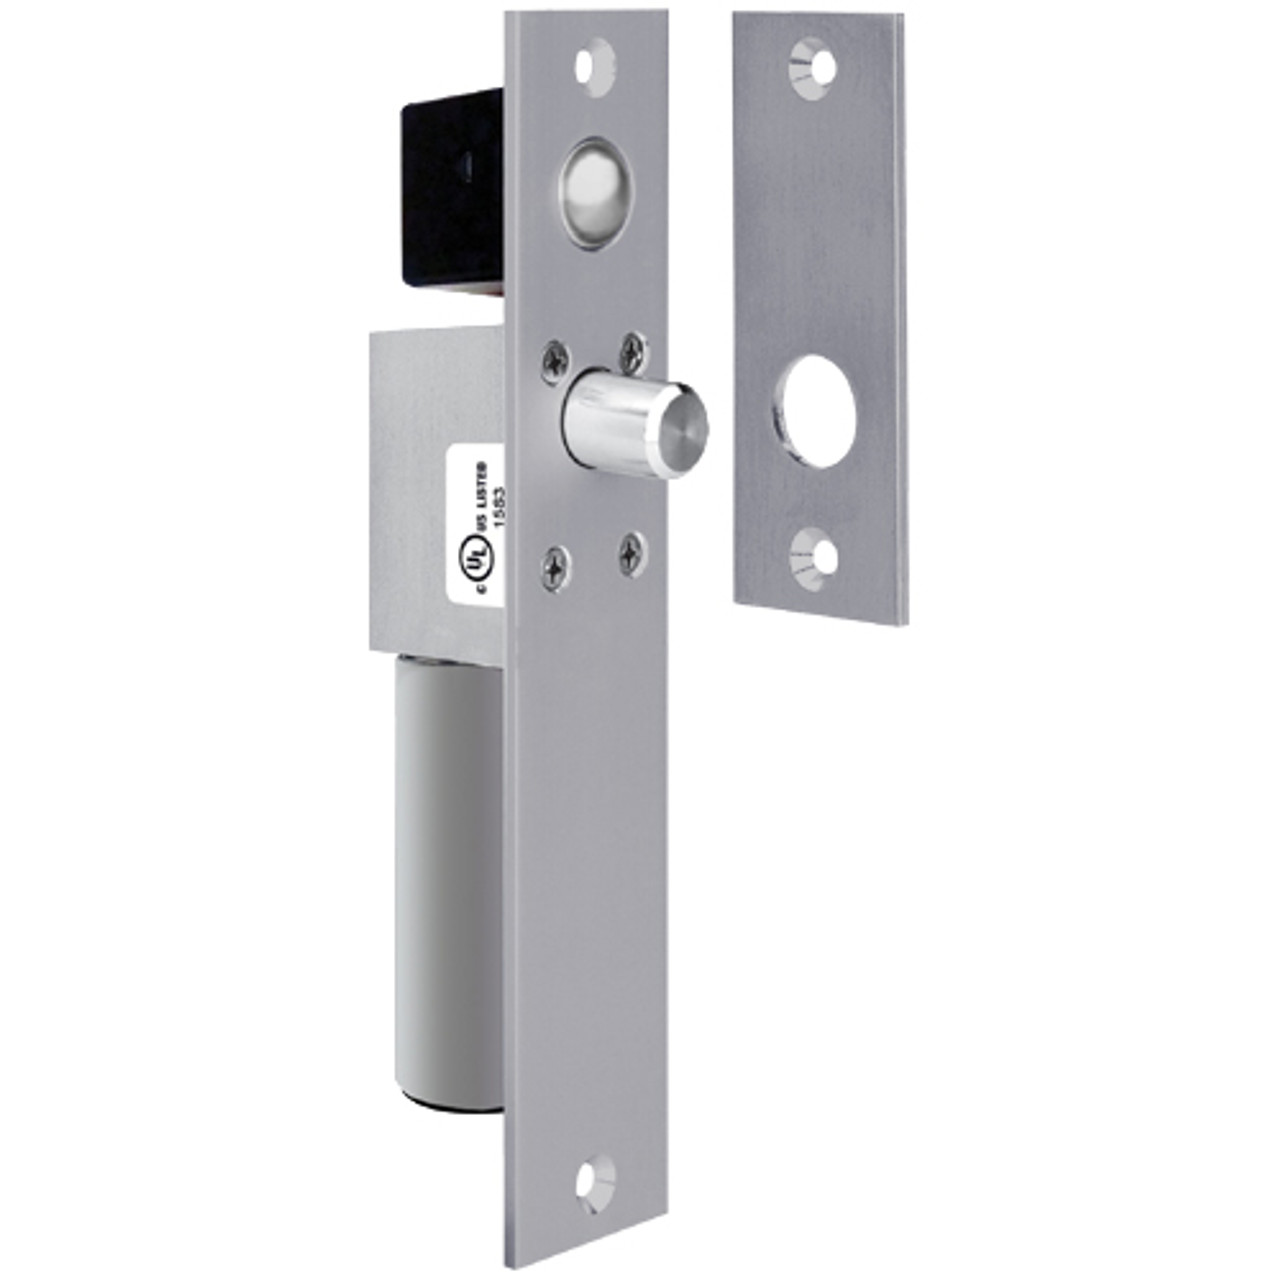 1291AHQ SDC Failsecure Spacesaver Mortise Bolt Lock in Dull Chrome